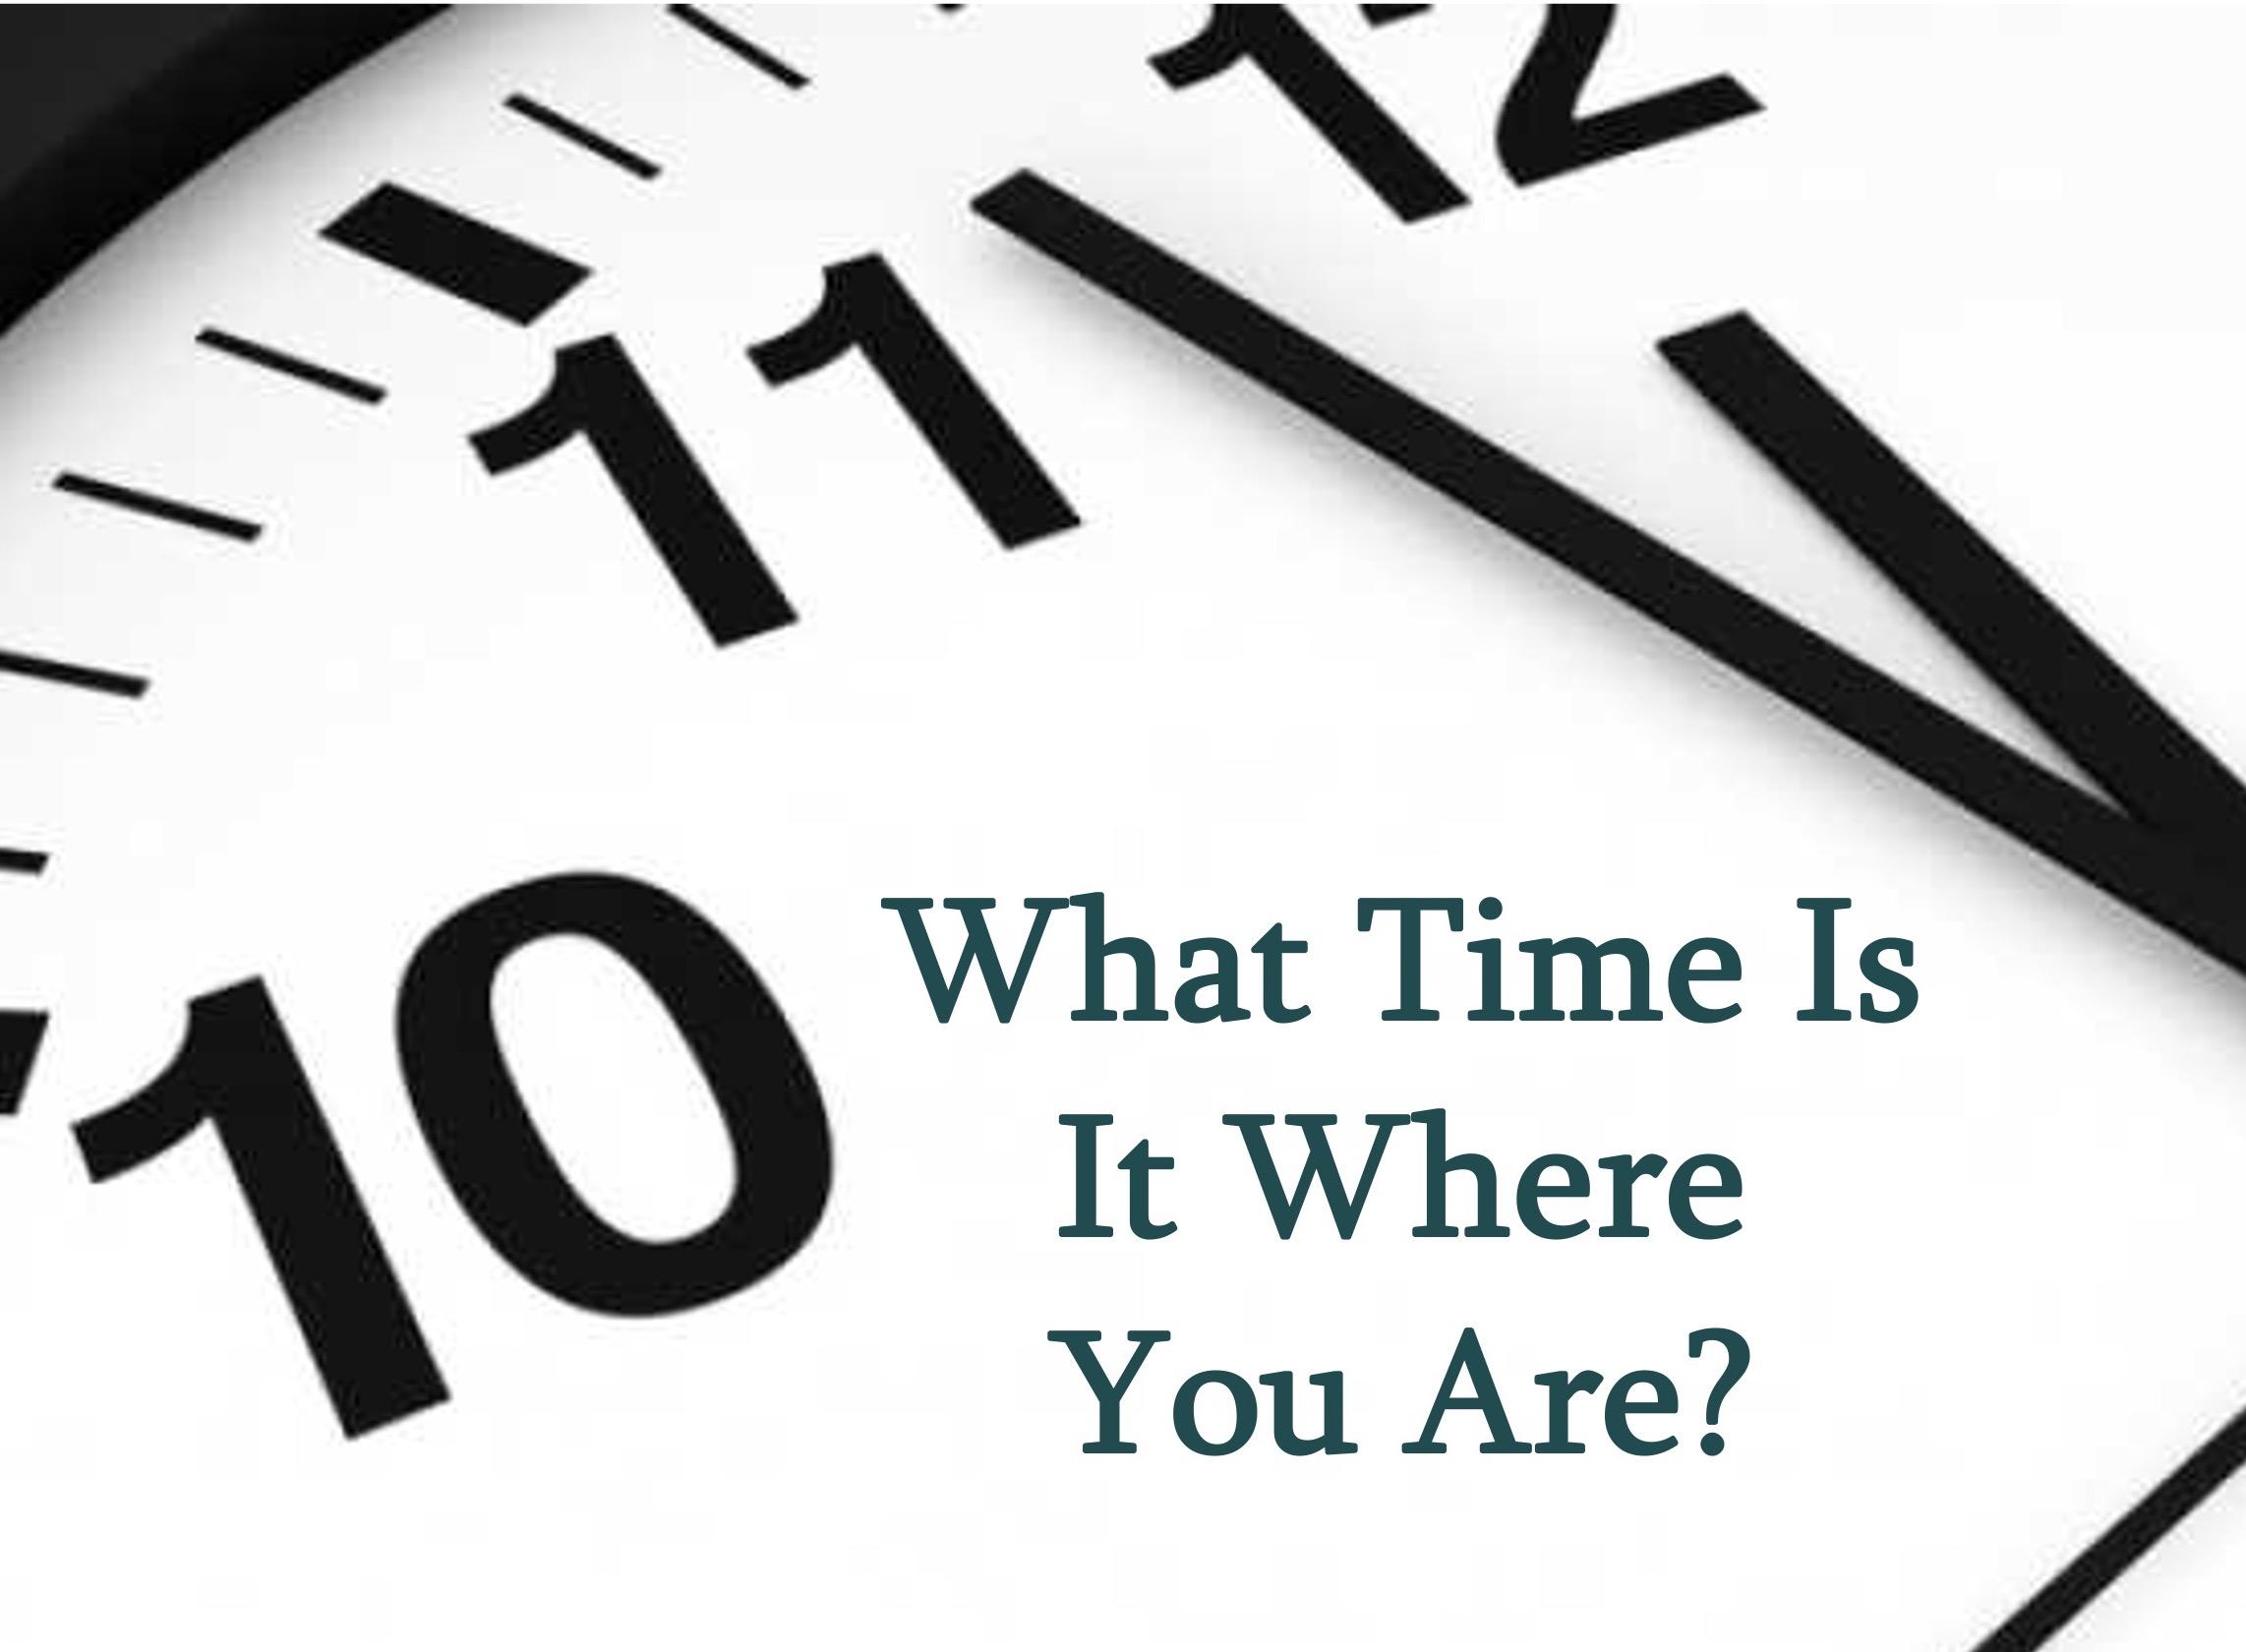 What Time Is It Where You Are?